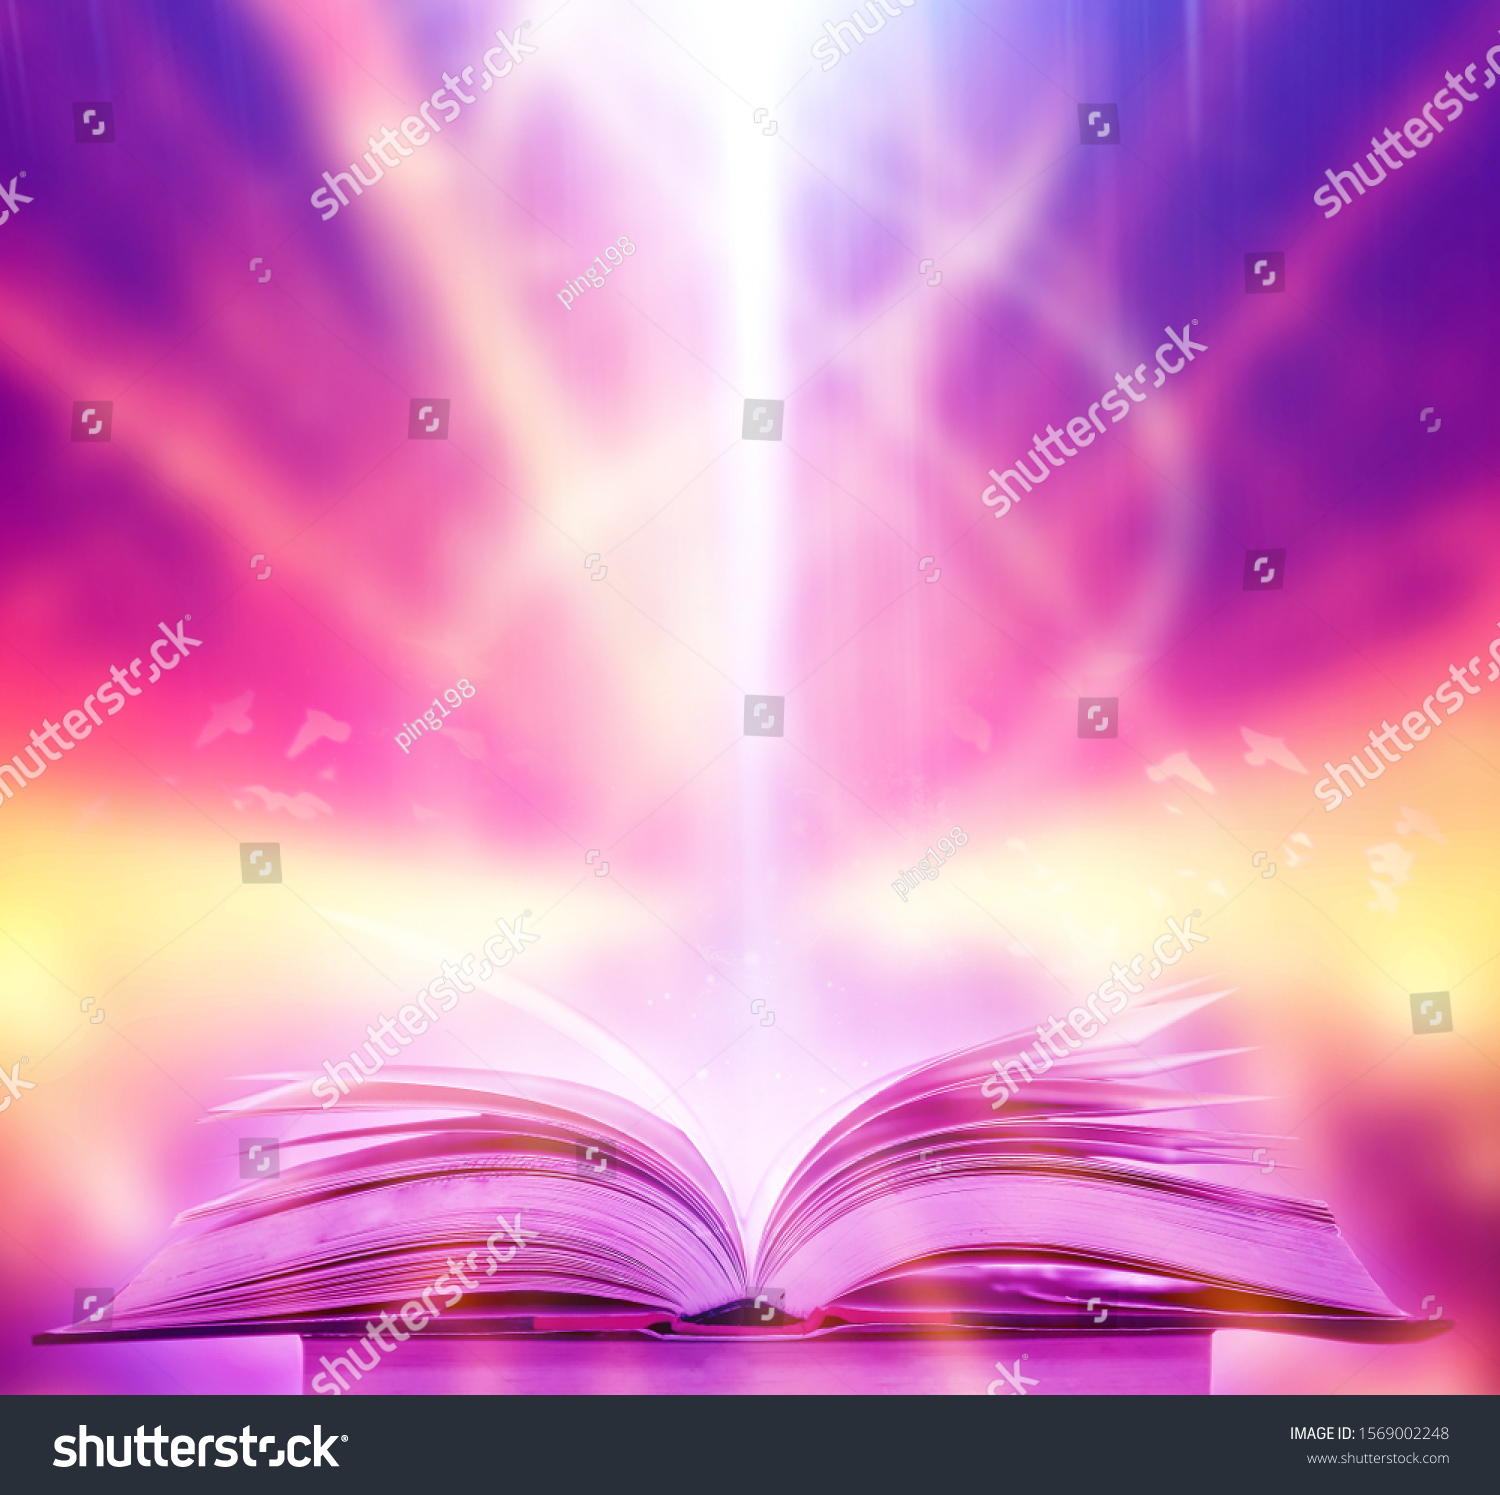 Imagine a picture book of an ancient book opened on a wooden table with a sparkling golden background. With magical power, magic, lightning around a glowing glowing book In the room of darkness #1569002248